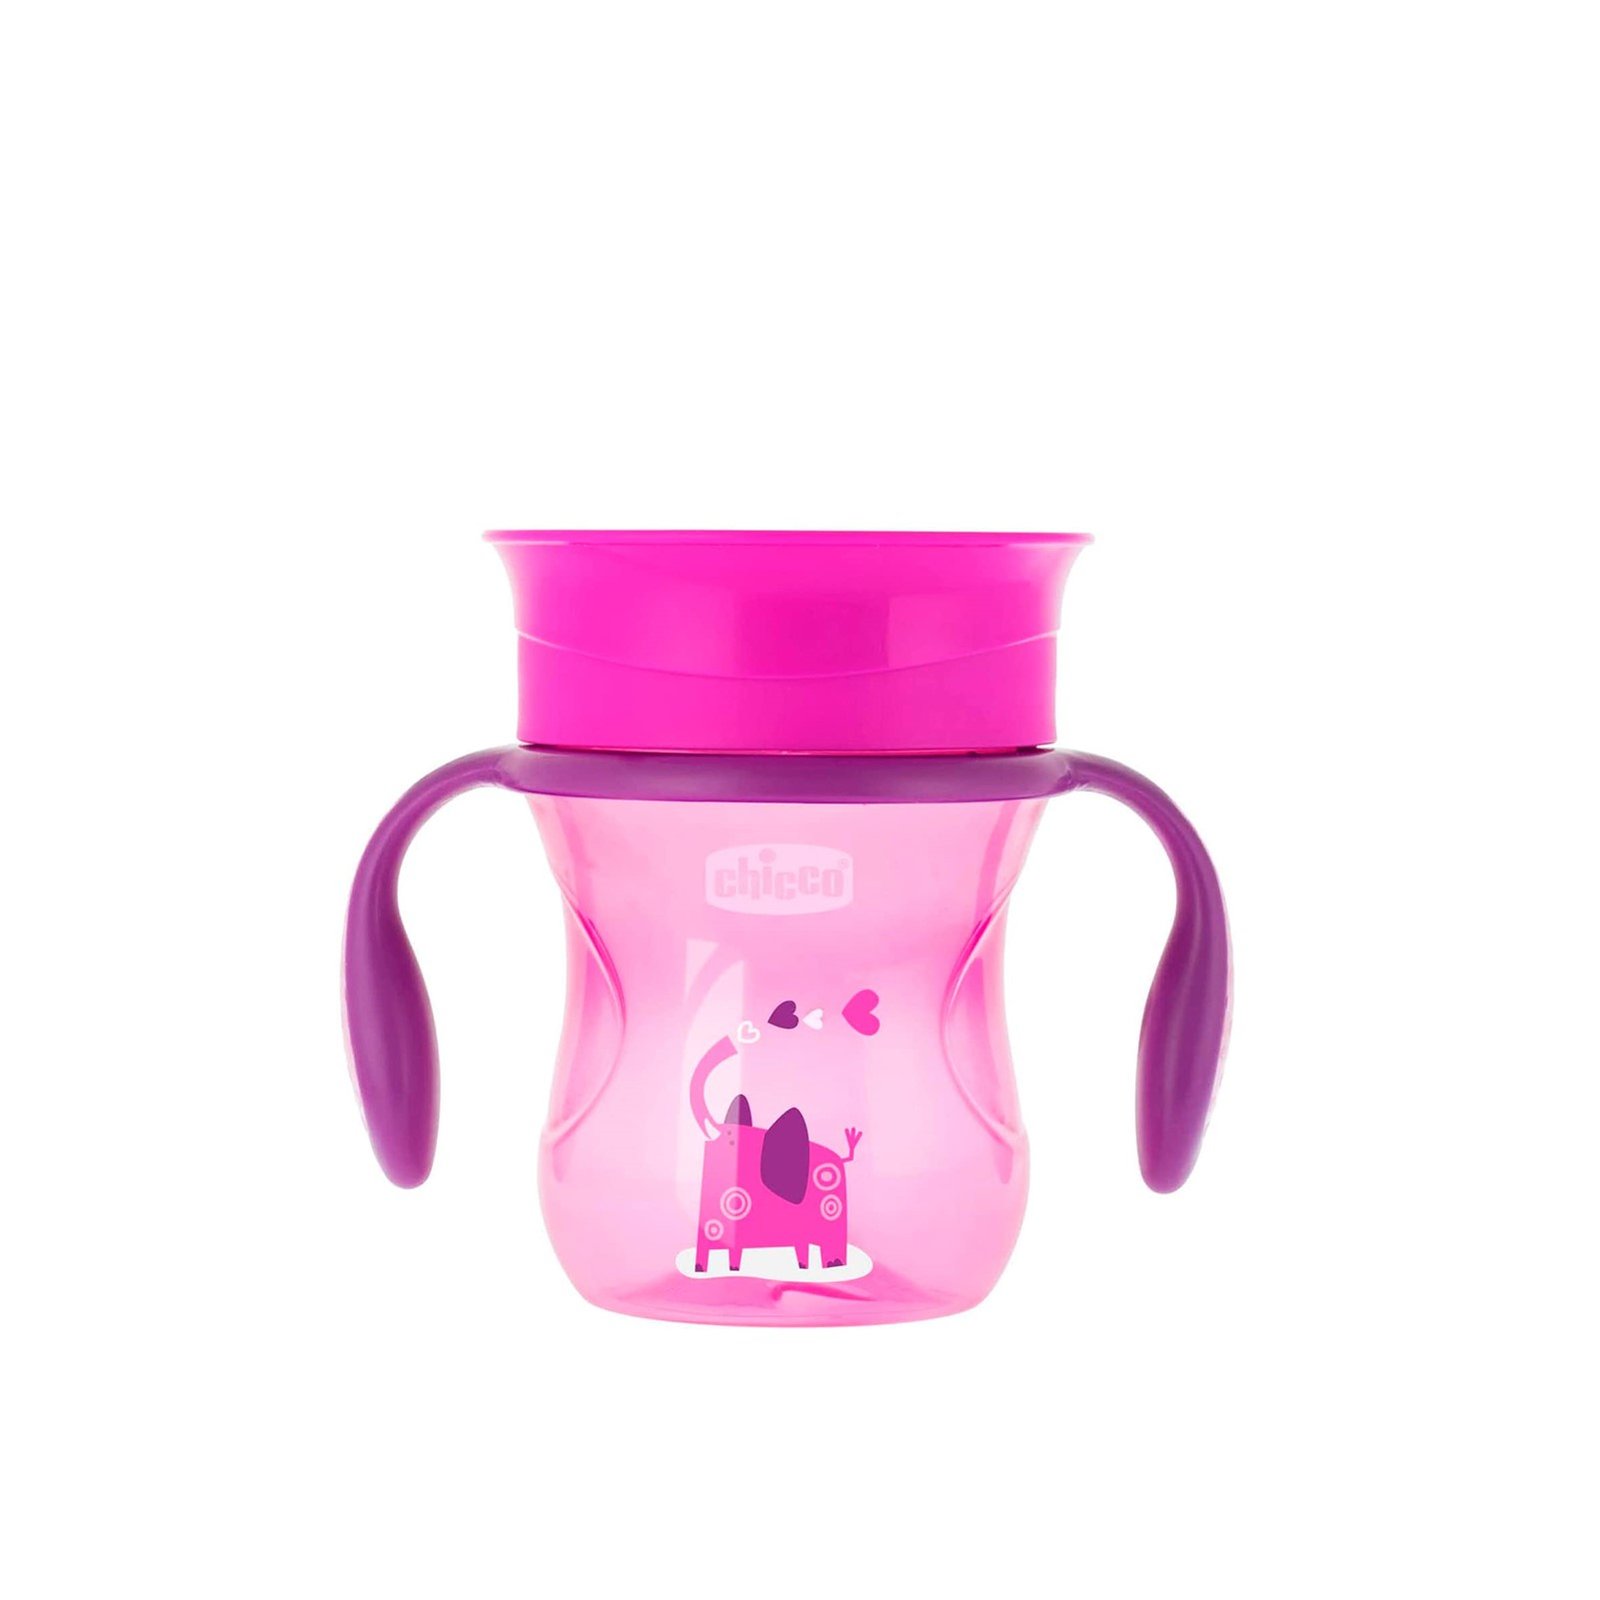 Chicco Mix & Match Perfect Cup Their First Glass 12m+ Pink 200ml (7 fl oz)